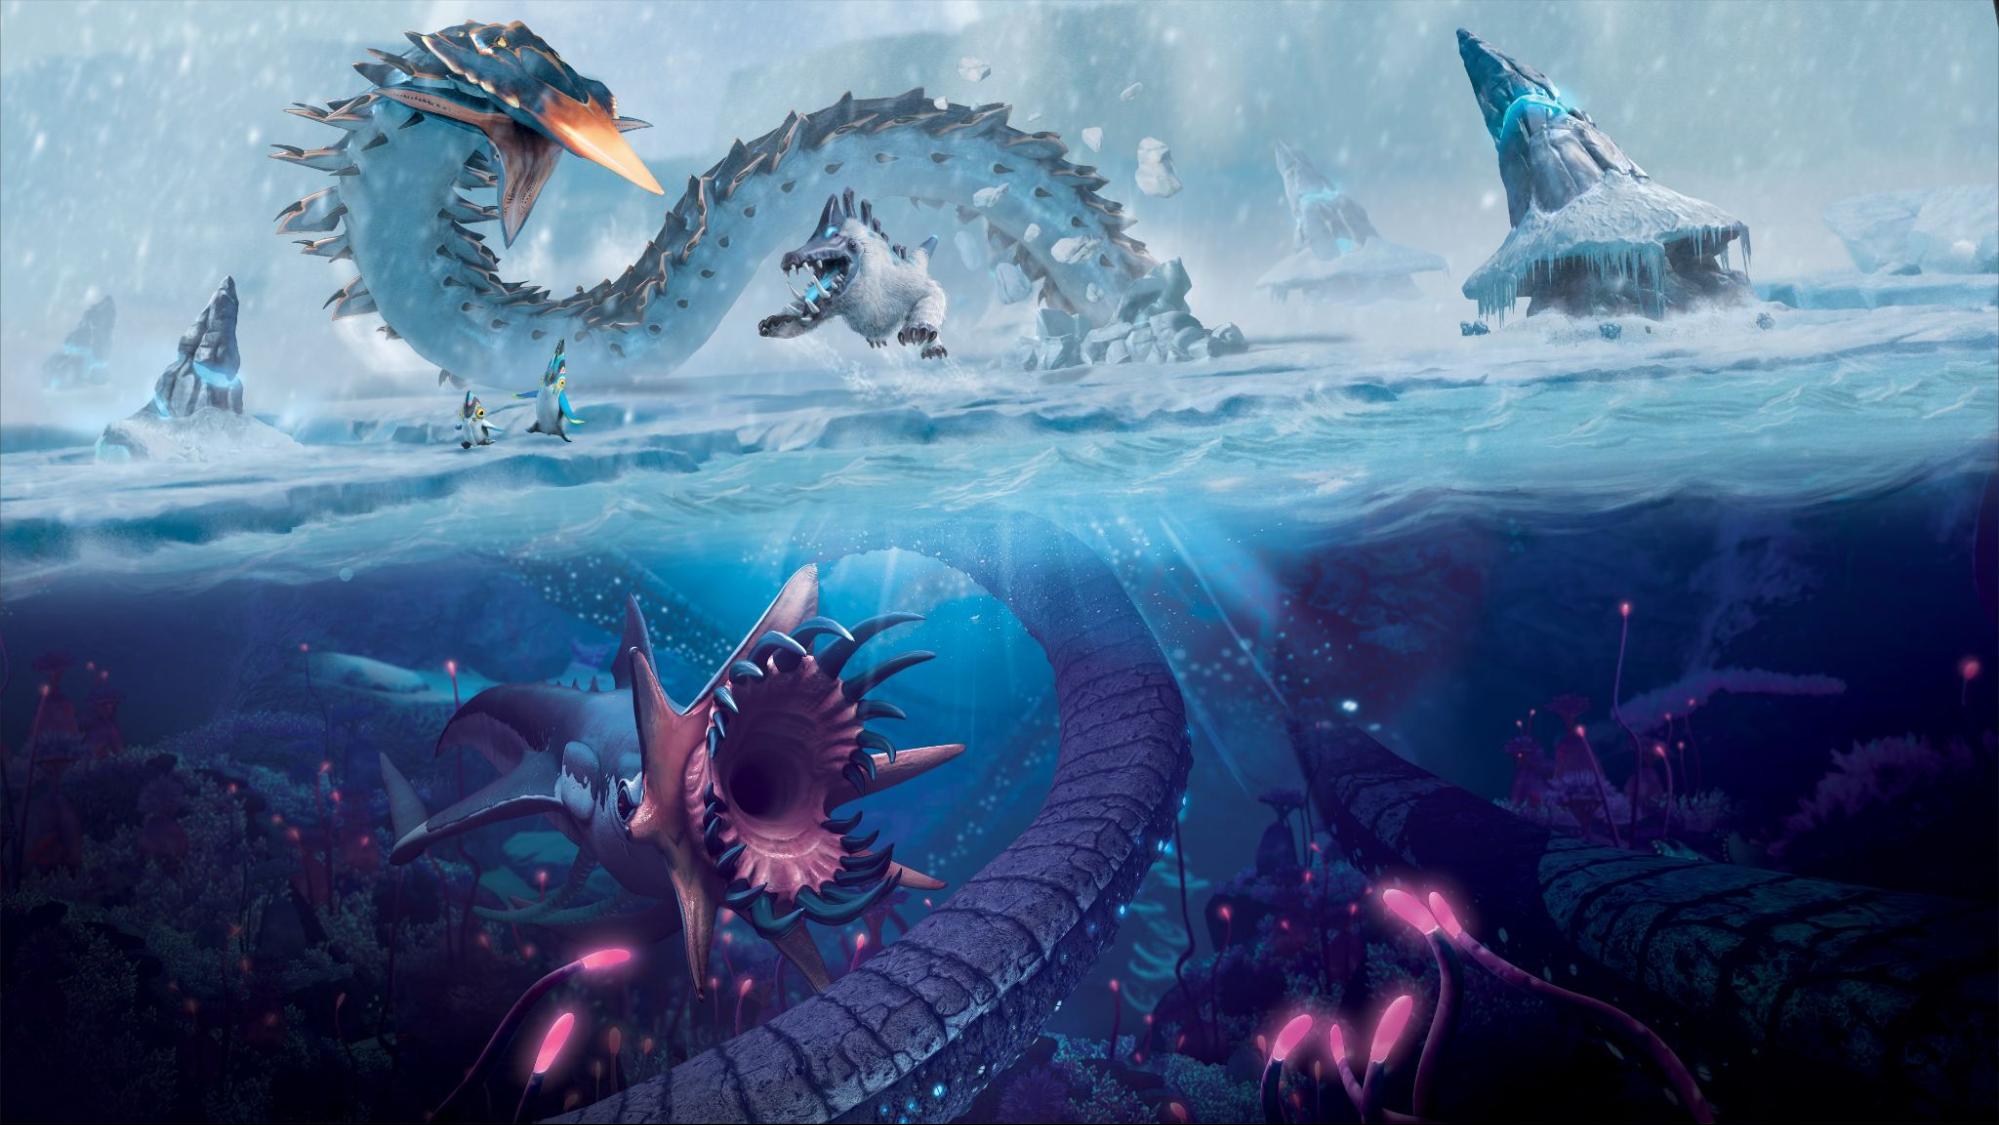 Subnautica 2 release date - Updated with statement from Unknown Worlds